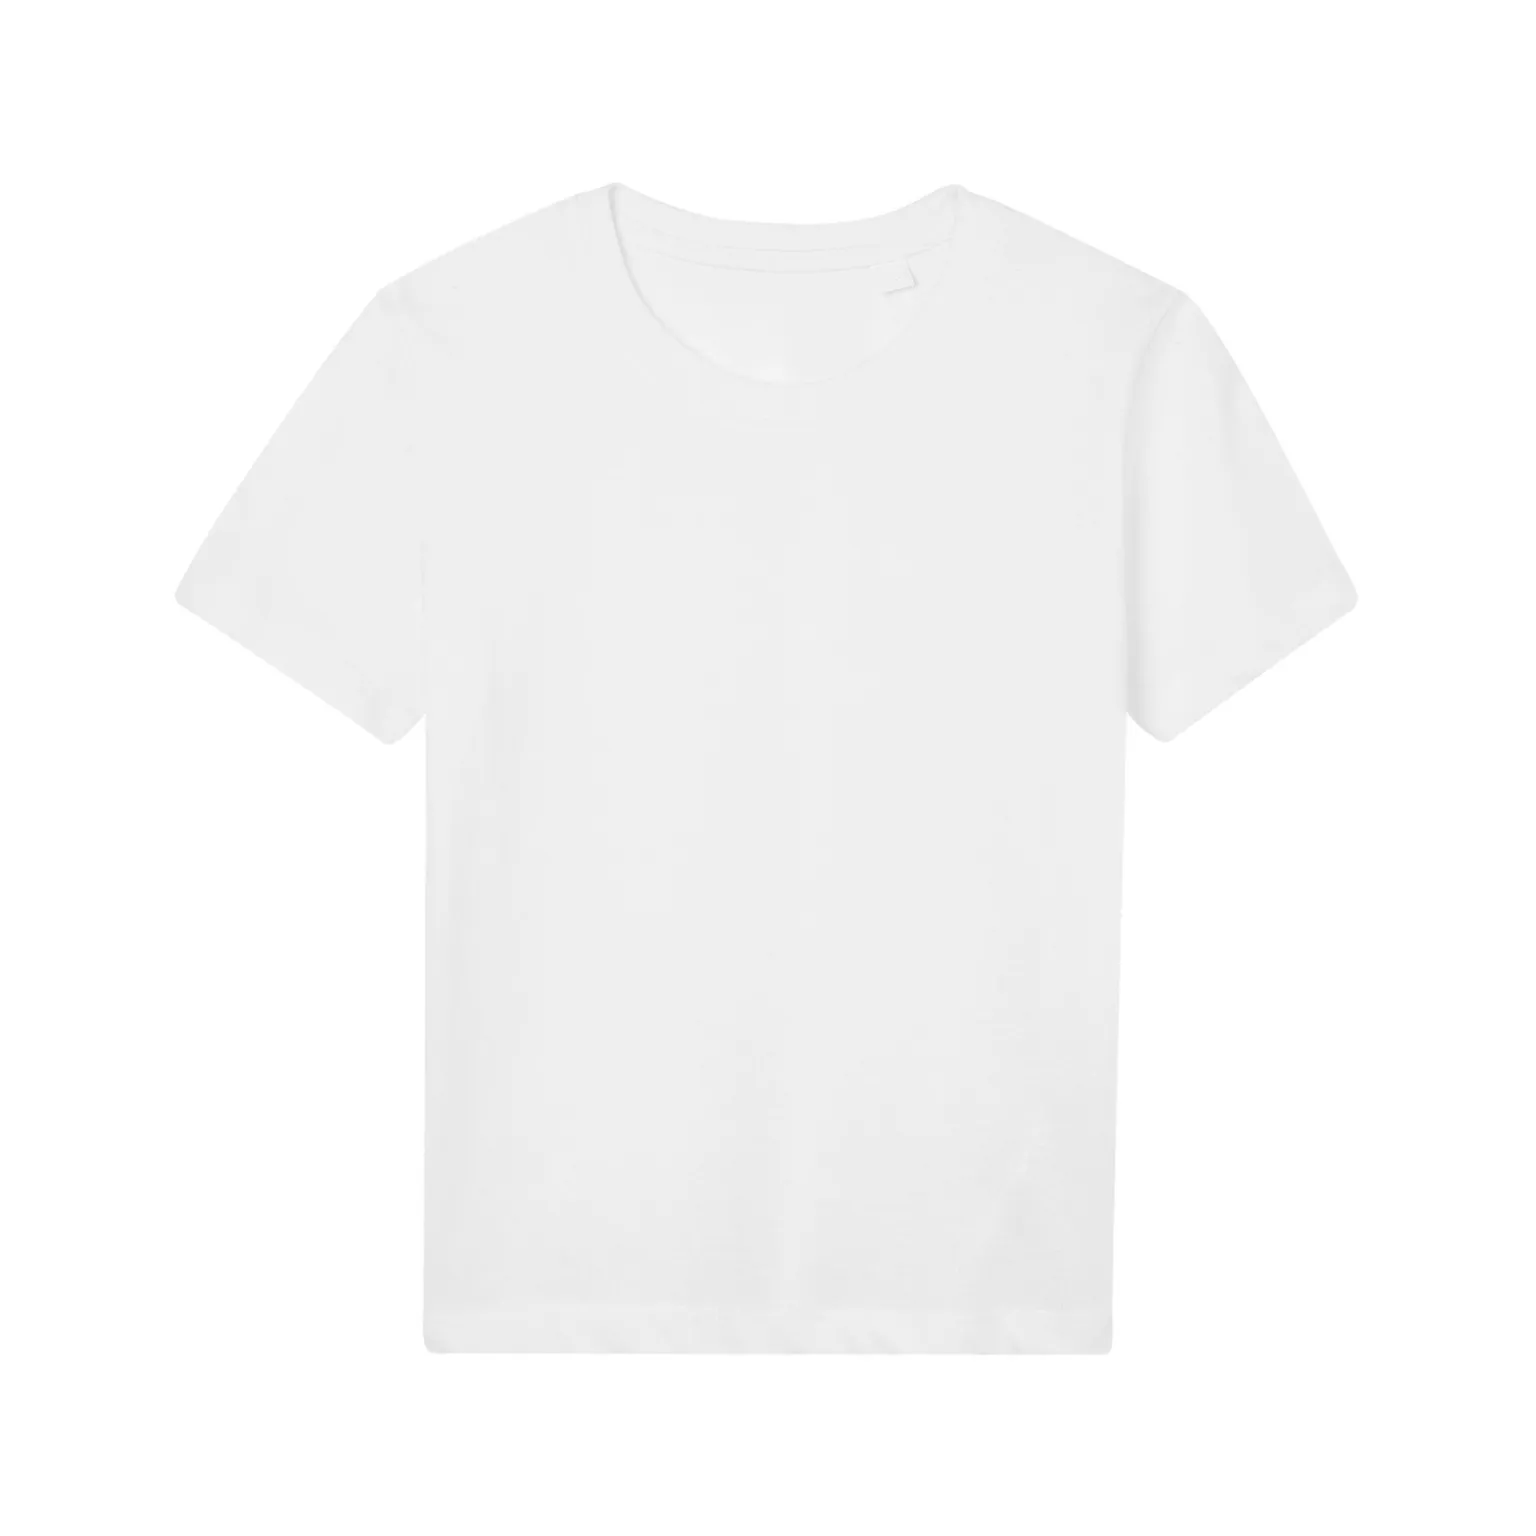 Benefit from our service offering competitive prices for Boys Plain T-Shirt.